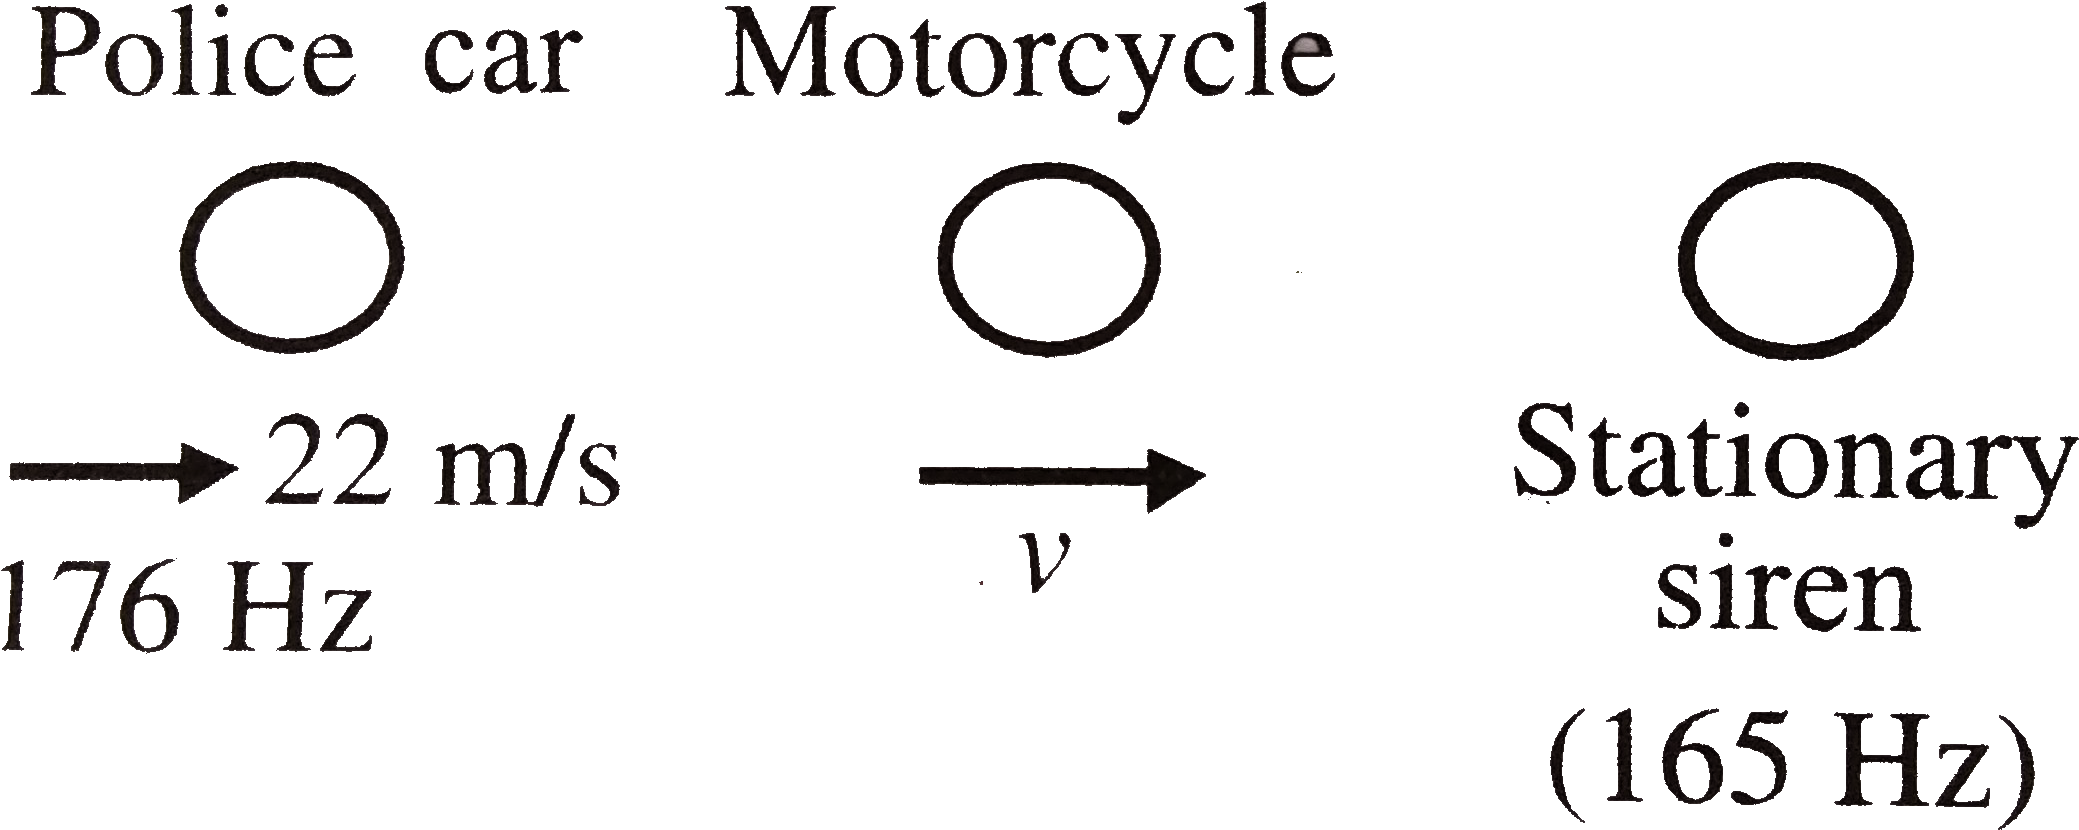 A Black Background With Text And A Circle And Arrow